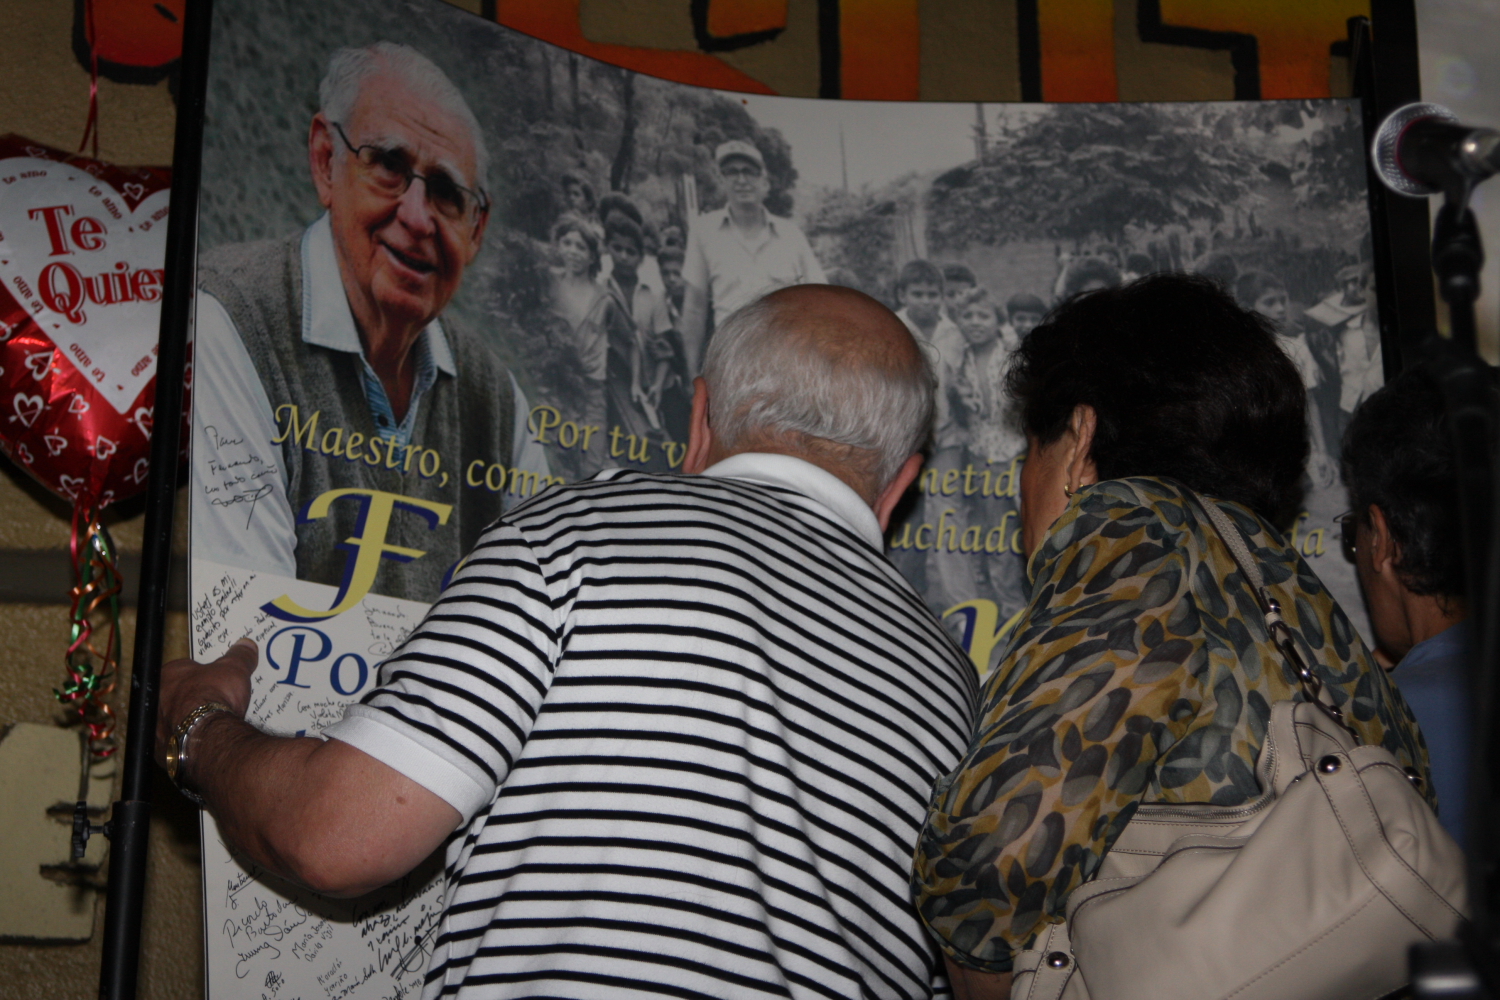 two people look at a sign of an older man in front of the poster